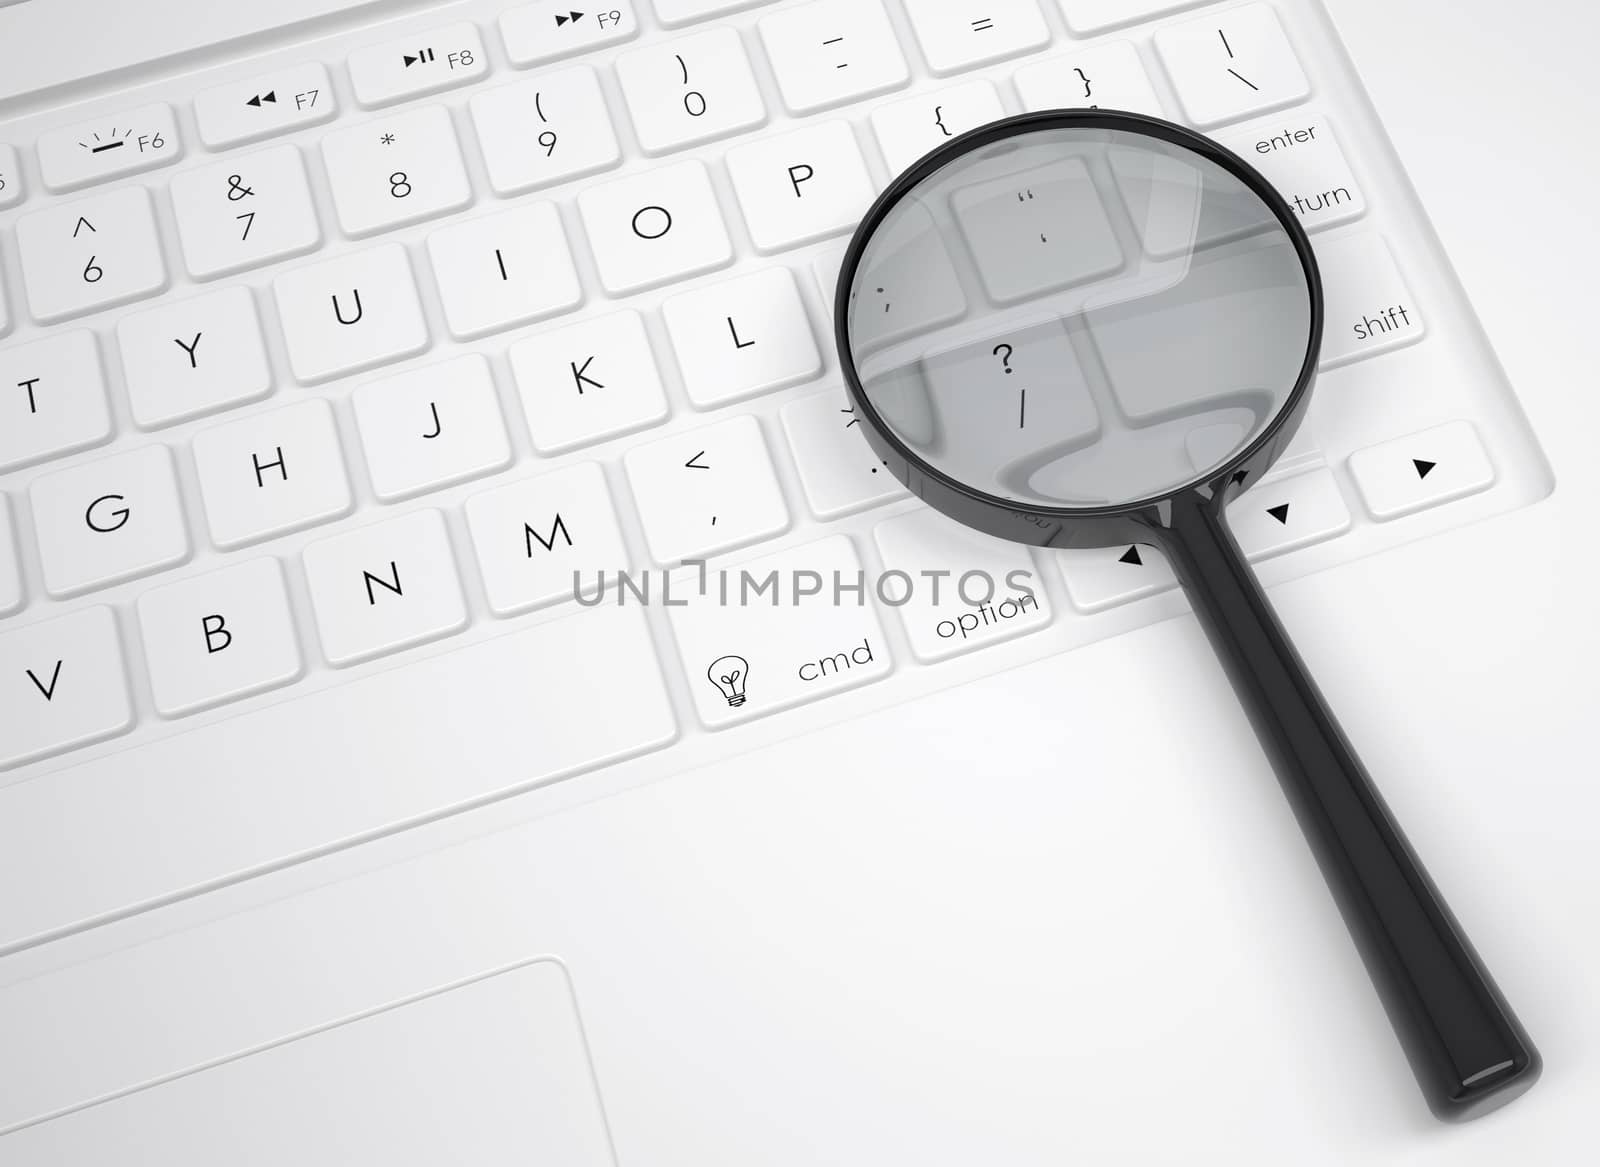 Magnifier glass on the keyboard. View from above